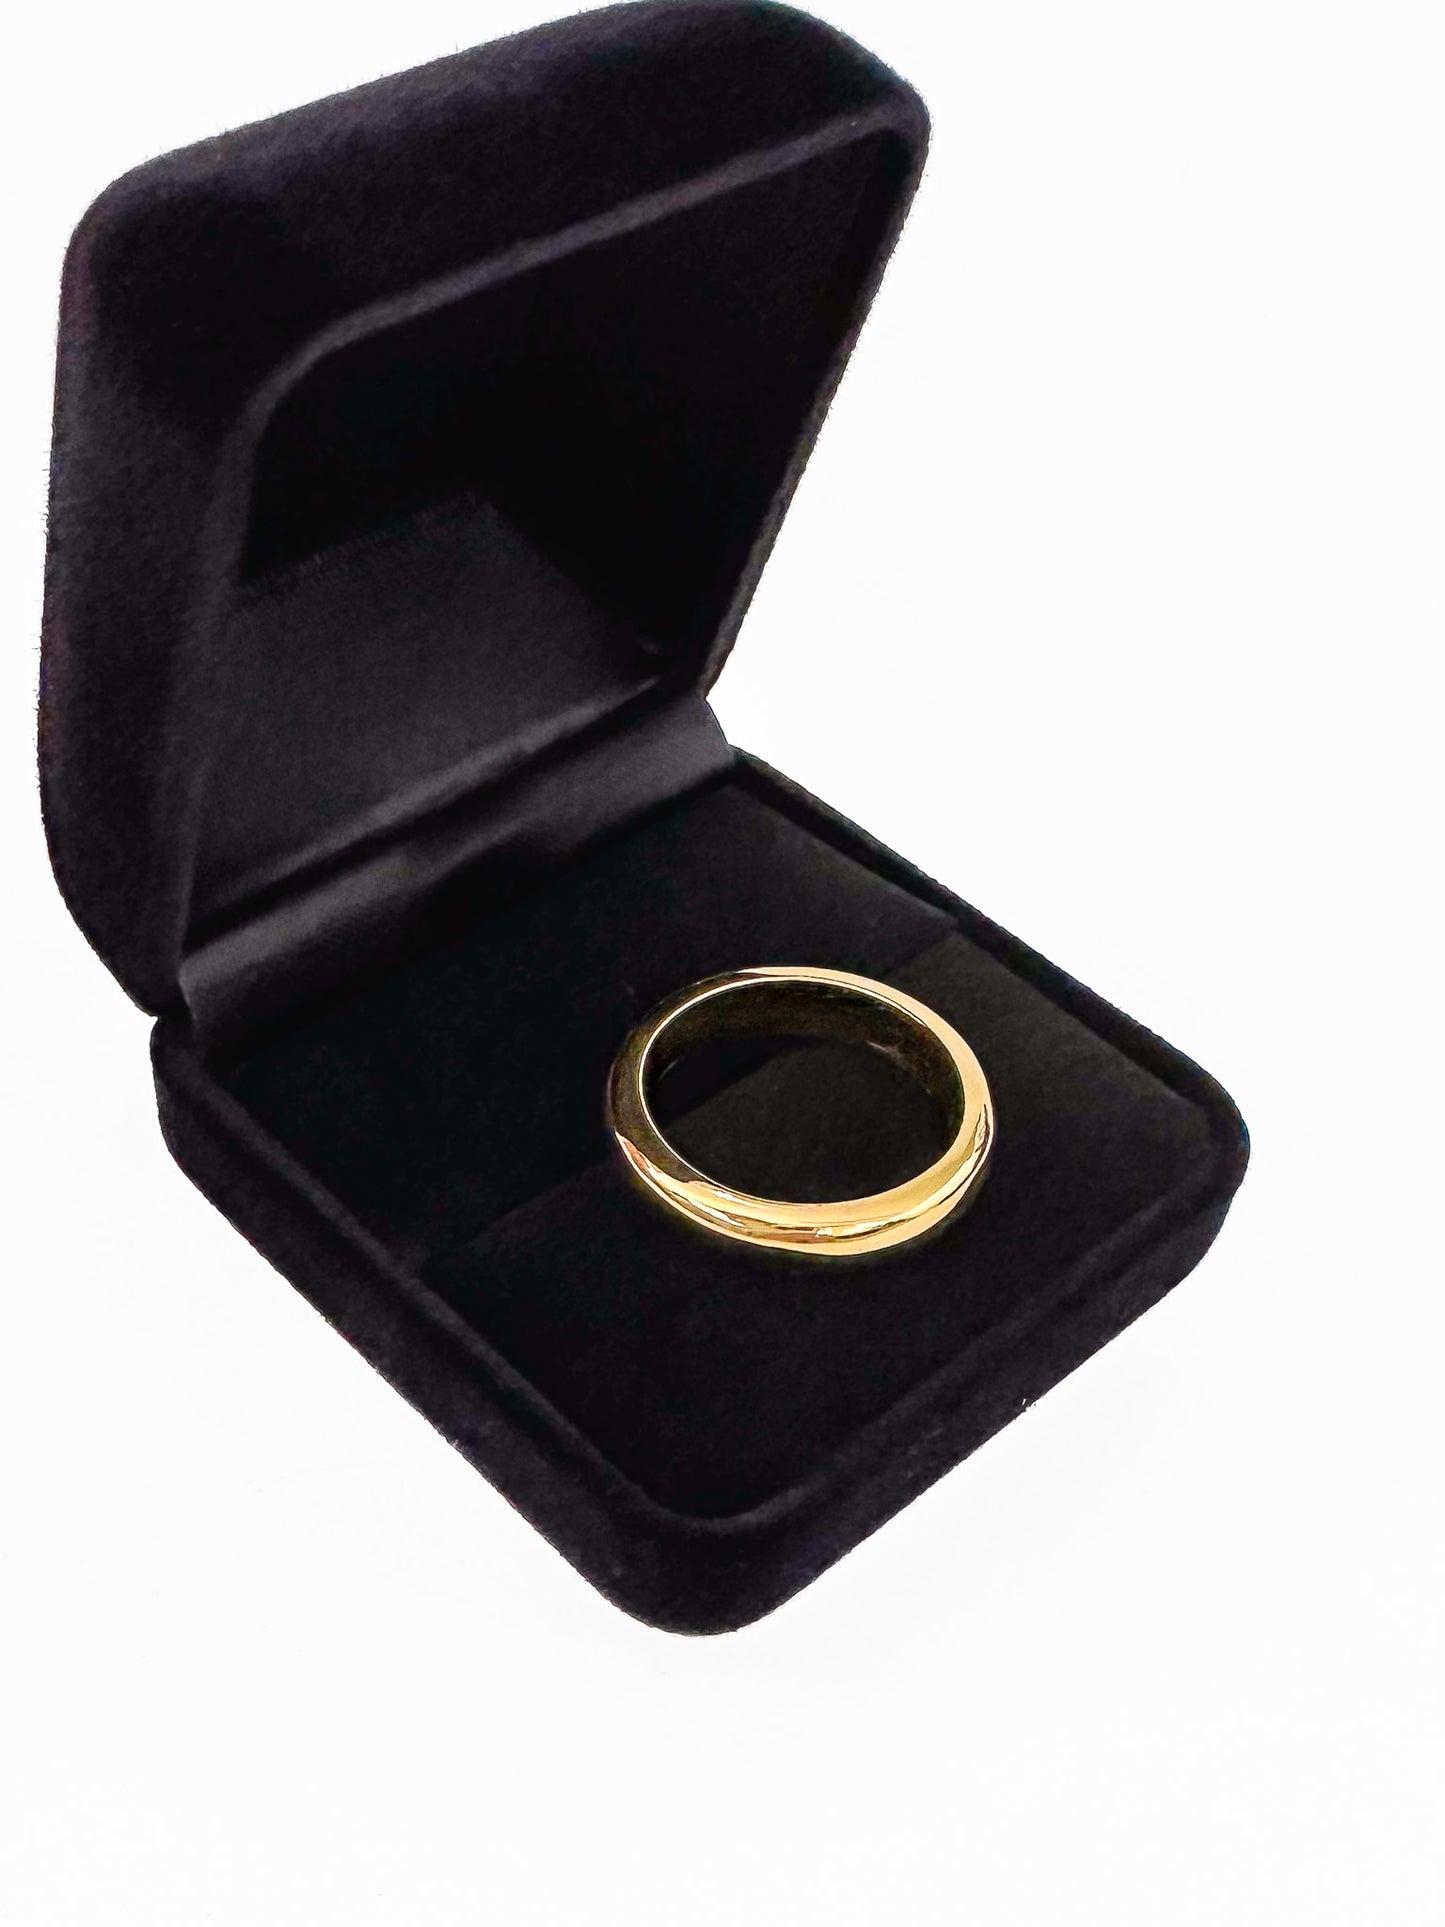 The ideal plain-band ring.  Key Features:  Versatile Design: This half round ring is a chameleon of style, ready to stand out solo or layer up. Its chunky, weighty feel adds substance to your ensemble. Width & weight: 4mm , average 7g (9ct) & 9g (18ct) Precious Metal Options: Available in solid 9ct or 18ct yellow gold, it serves as an ideal wedding band or addition to your everyday stack. 